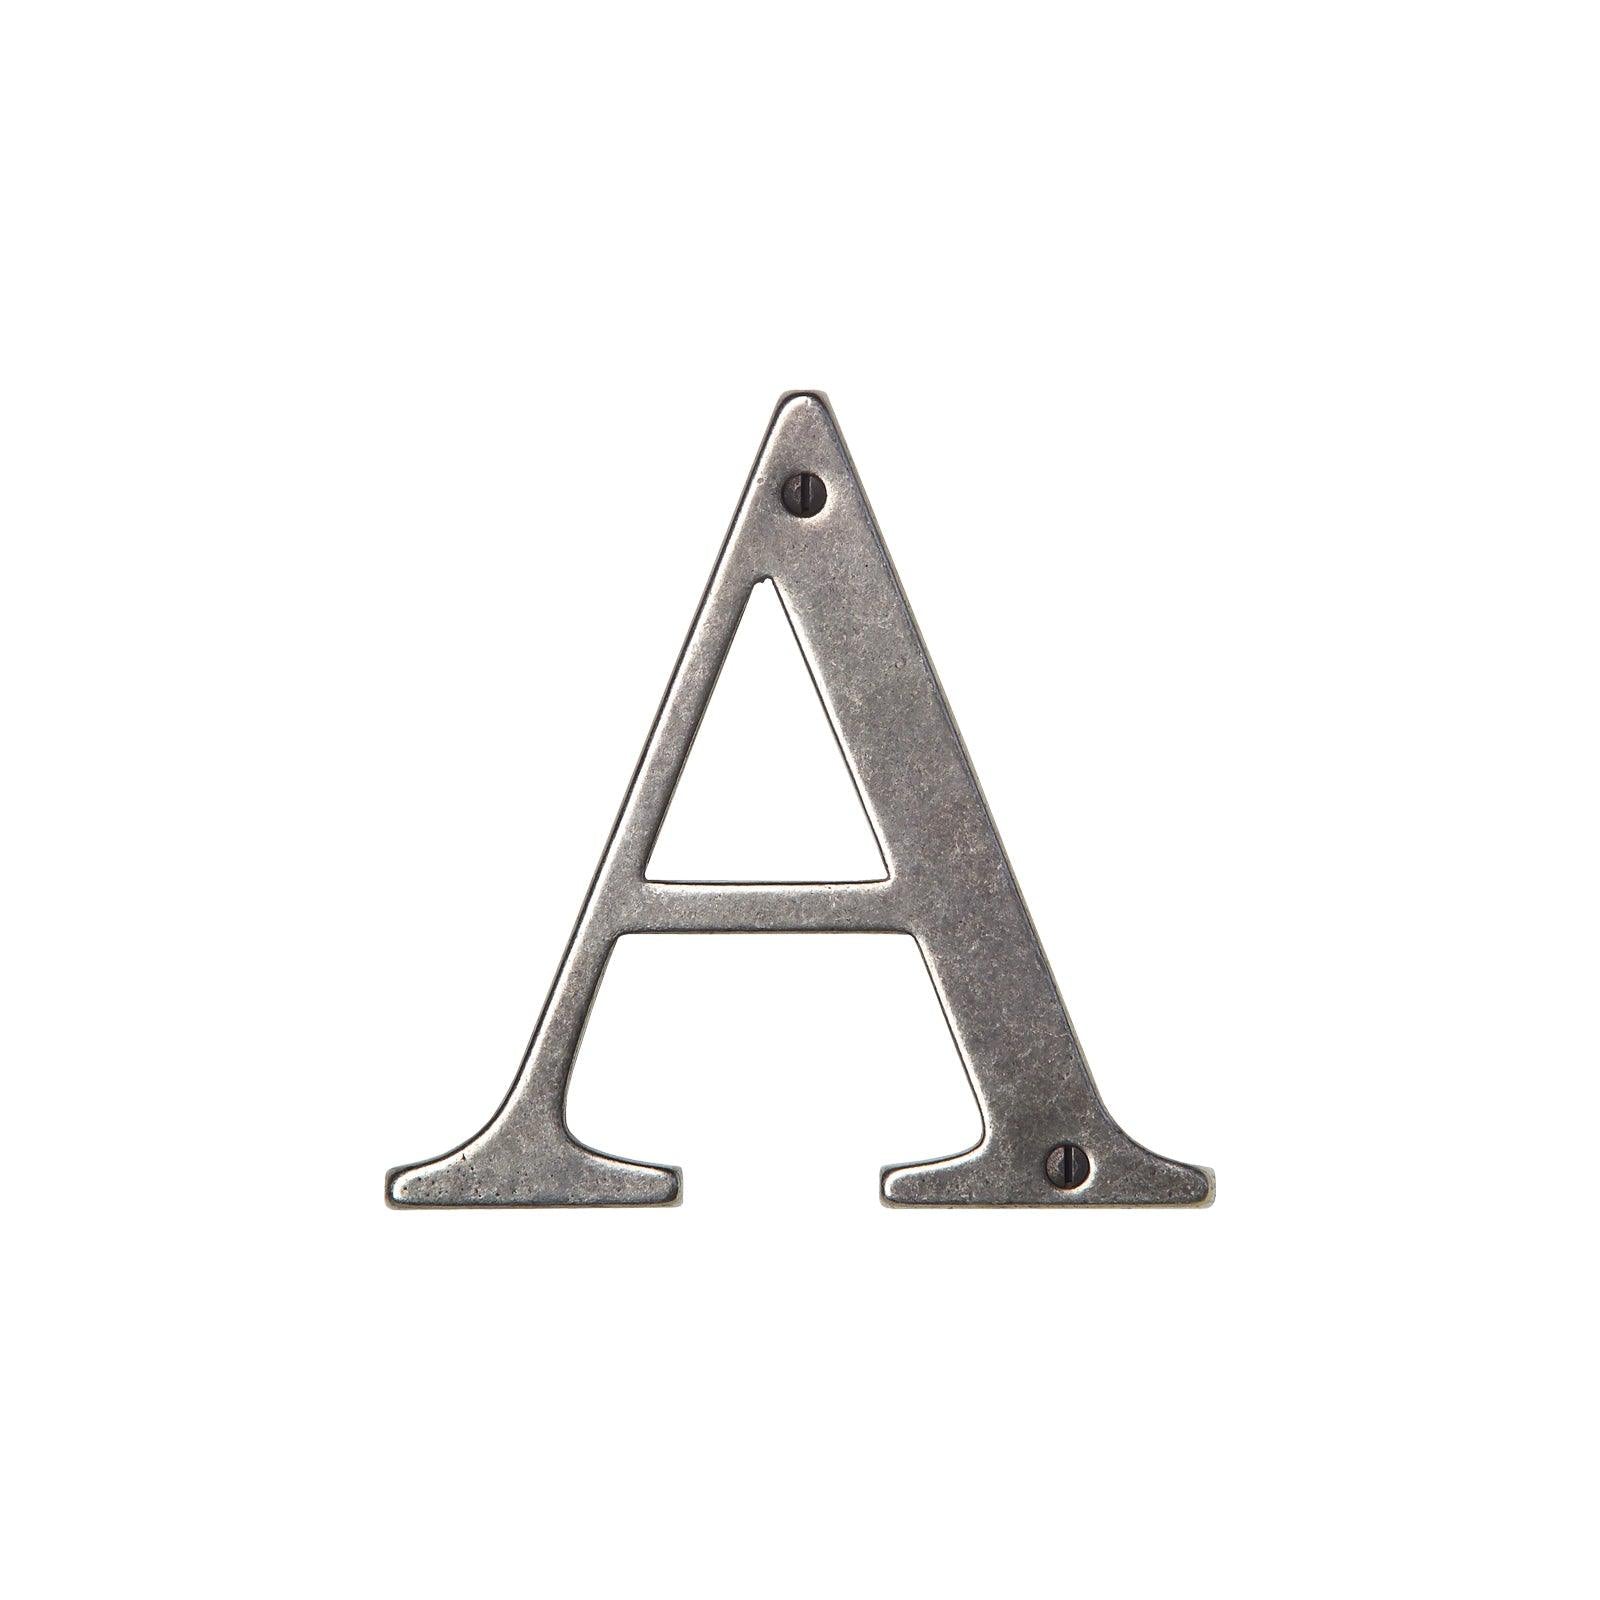 L400G - 4" House Letter “G" - Discount Rocky Mountain Hardware